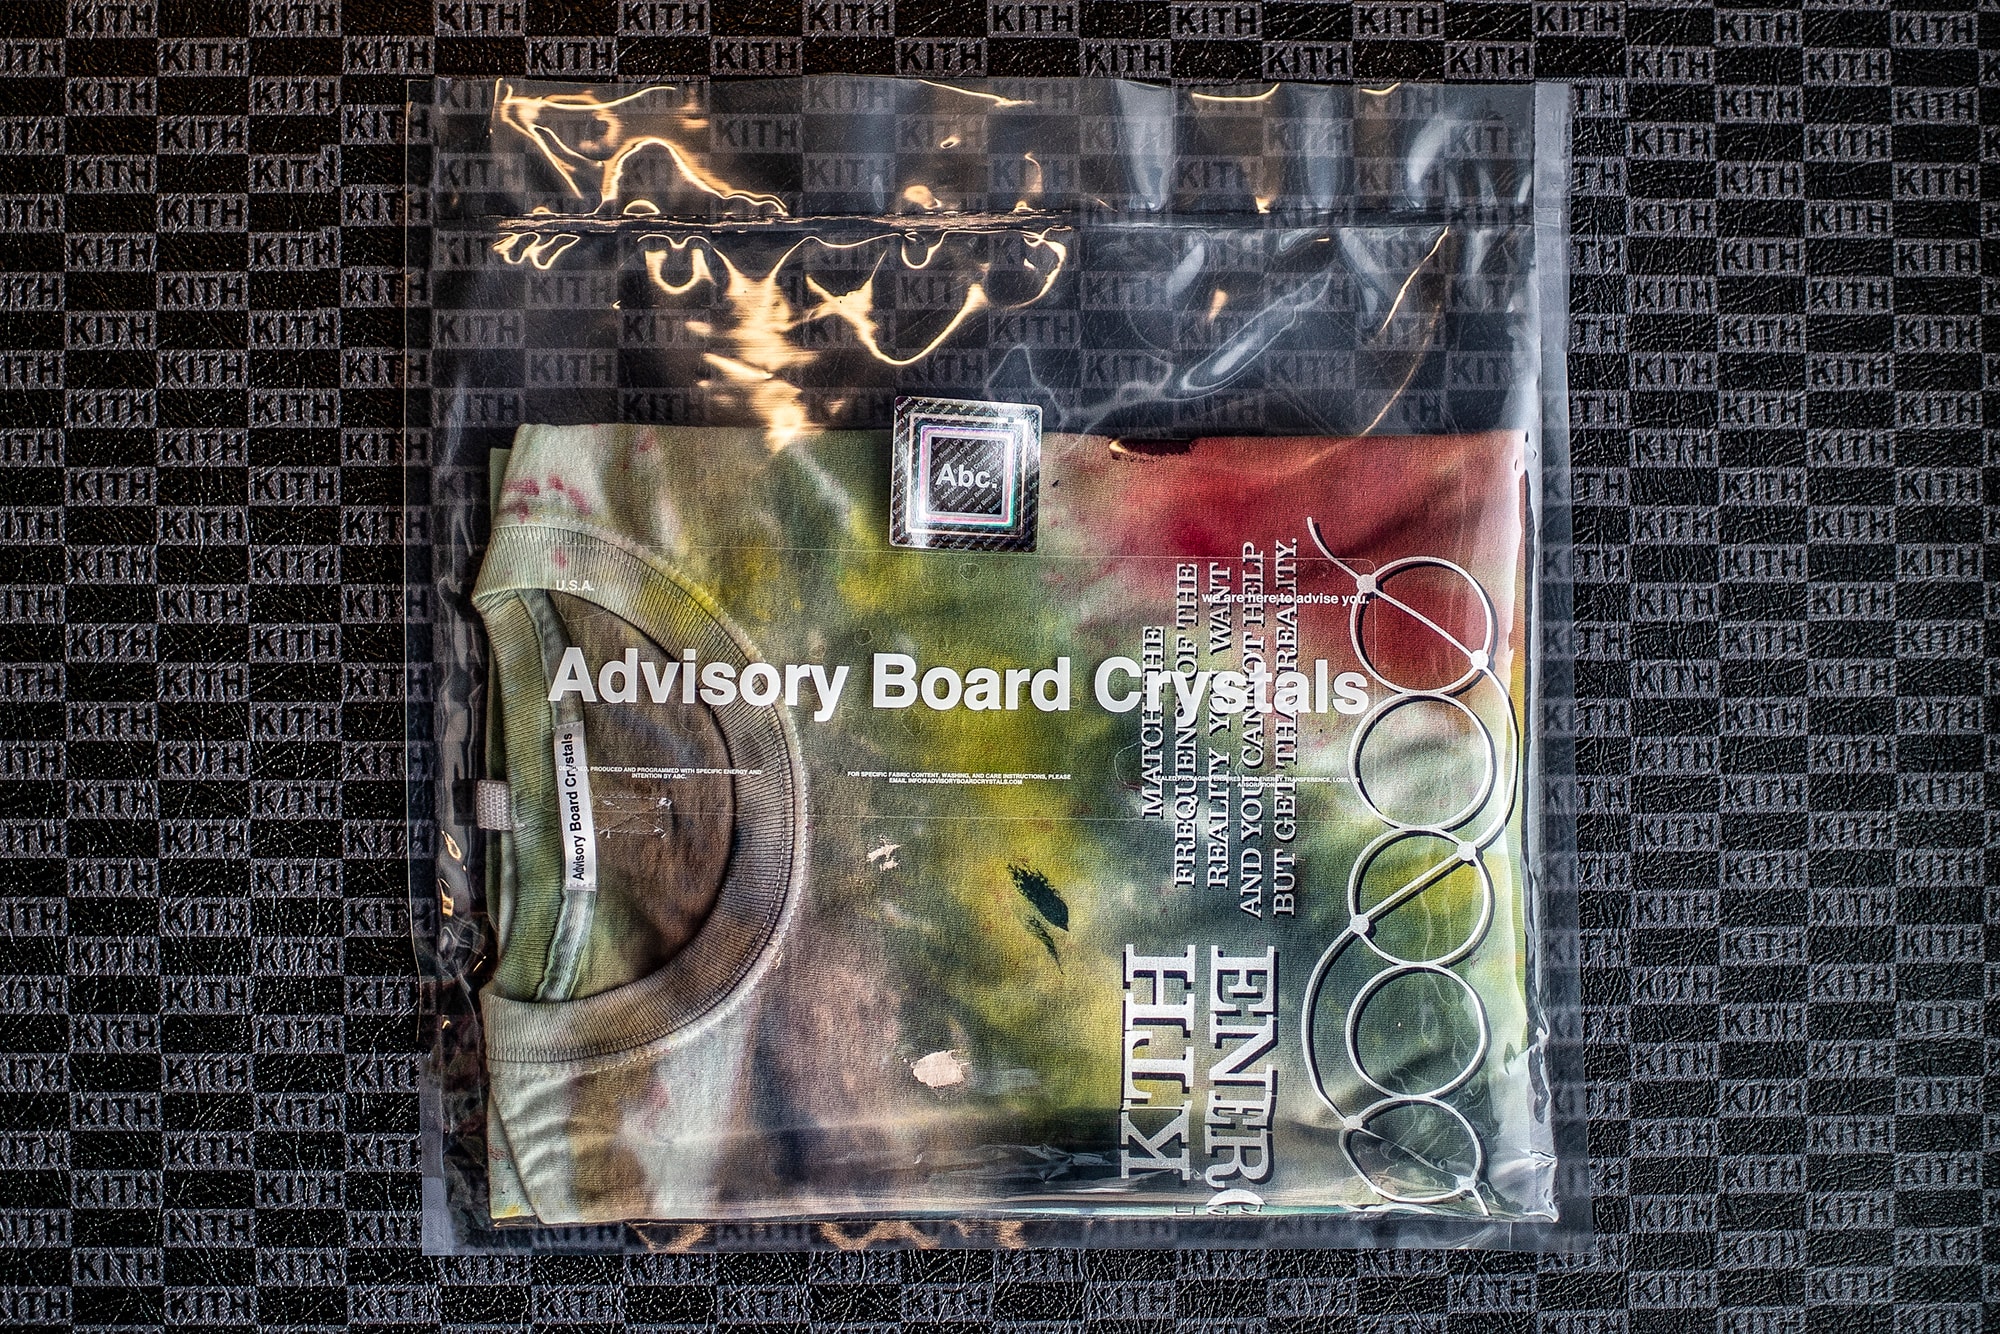 abc advisory board crystals kith energy is everything tie dye t shirt fashion 2018 september